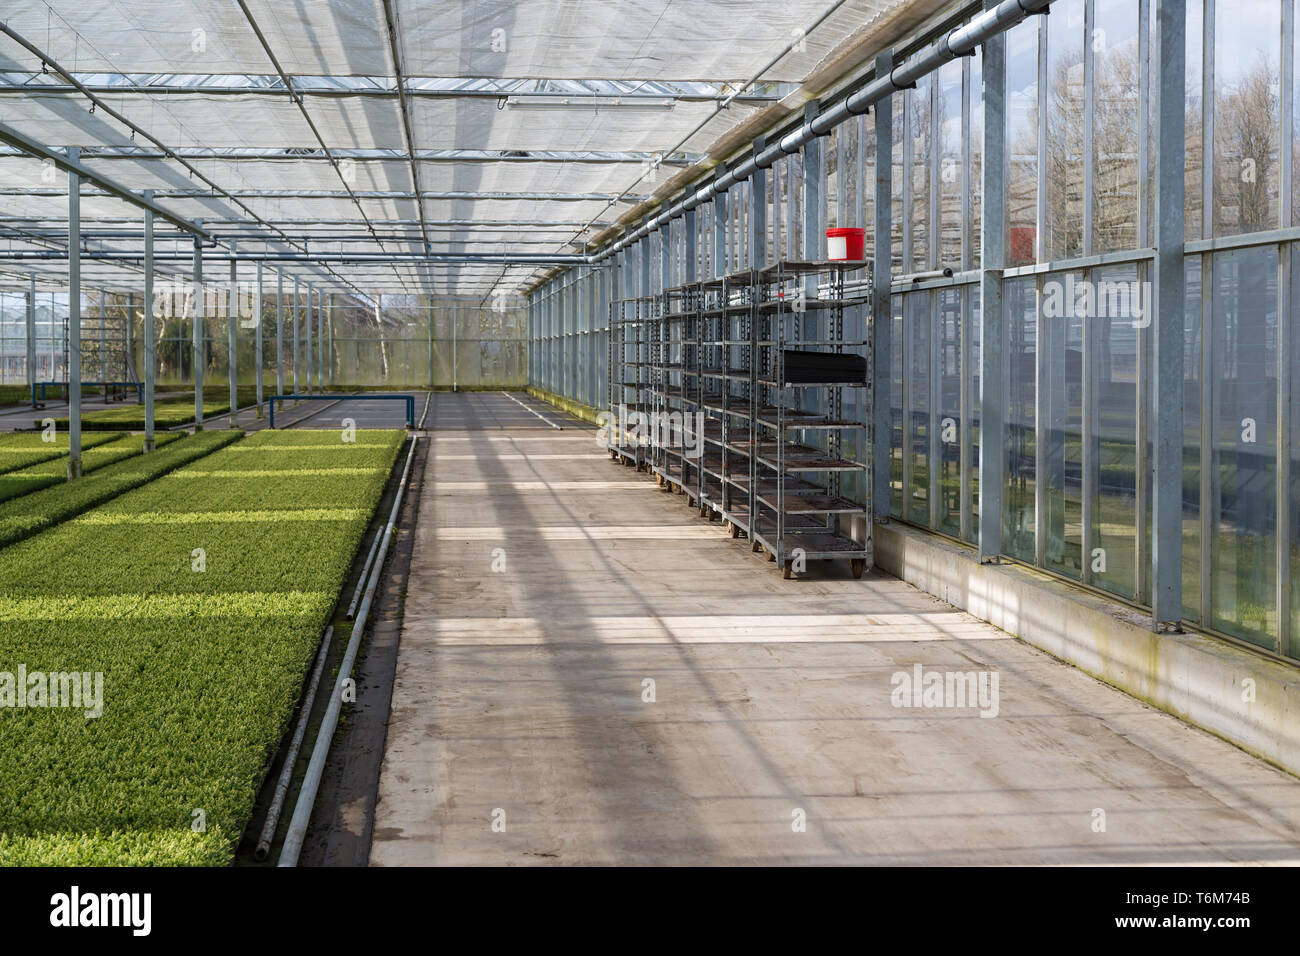 Cultivation of cupressus in a Dutch greenhouse Stock Photo